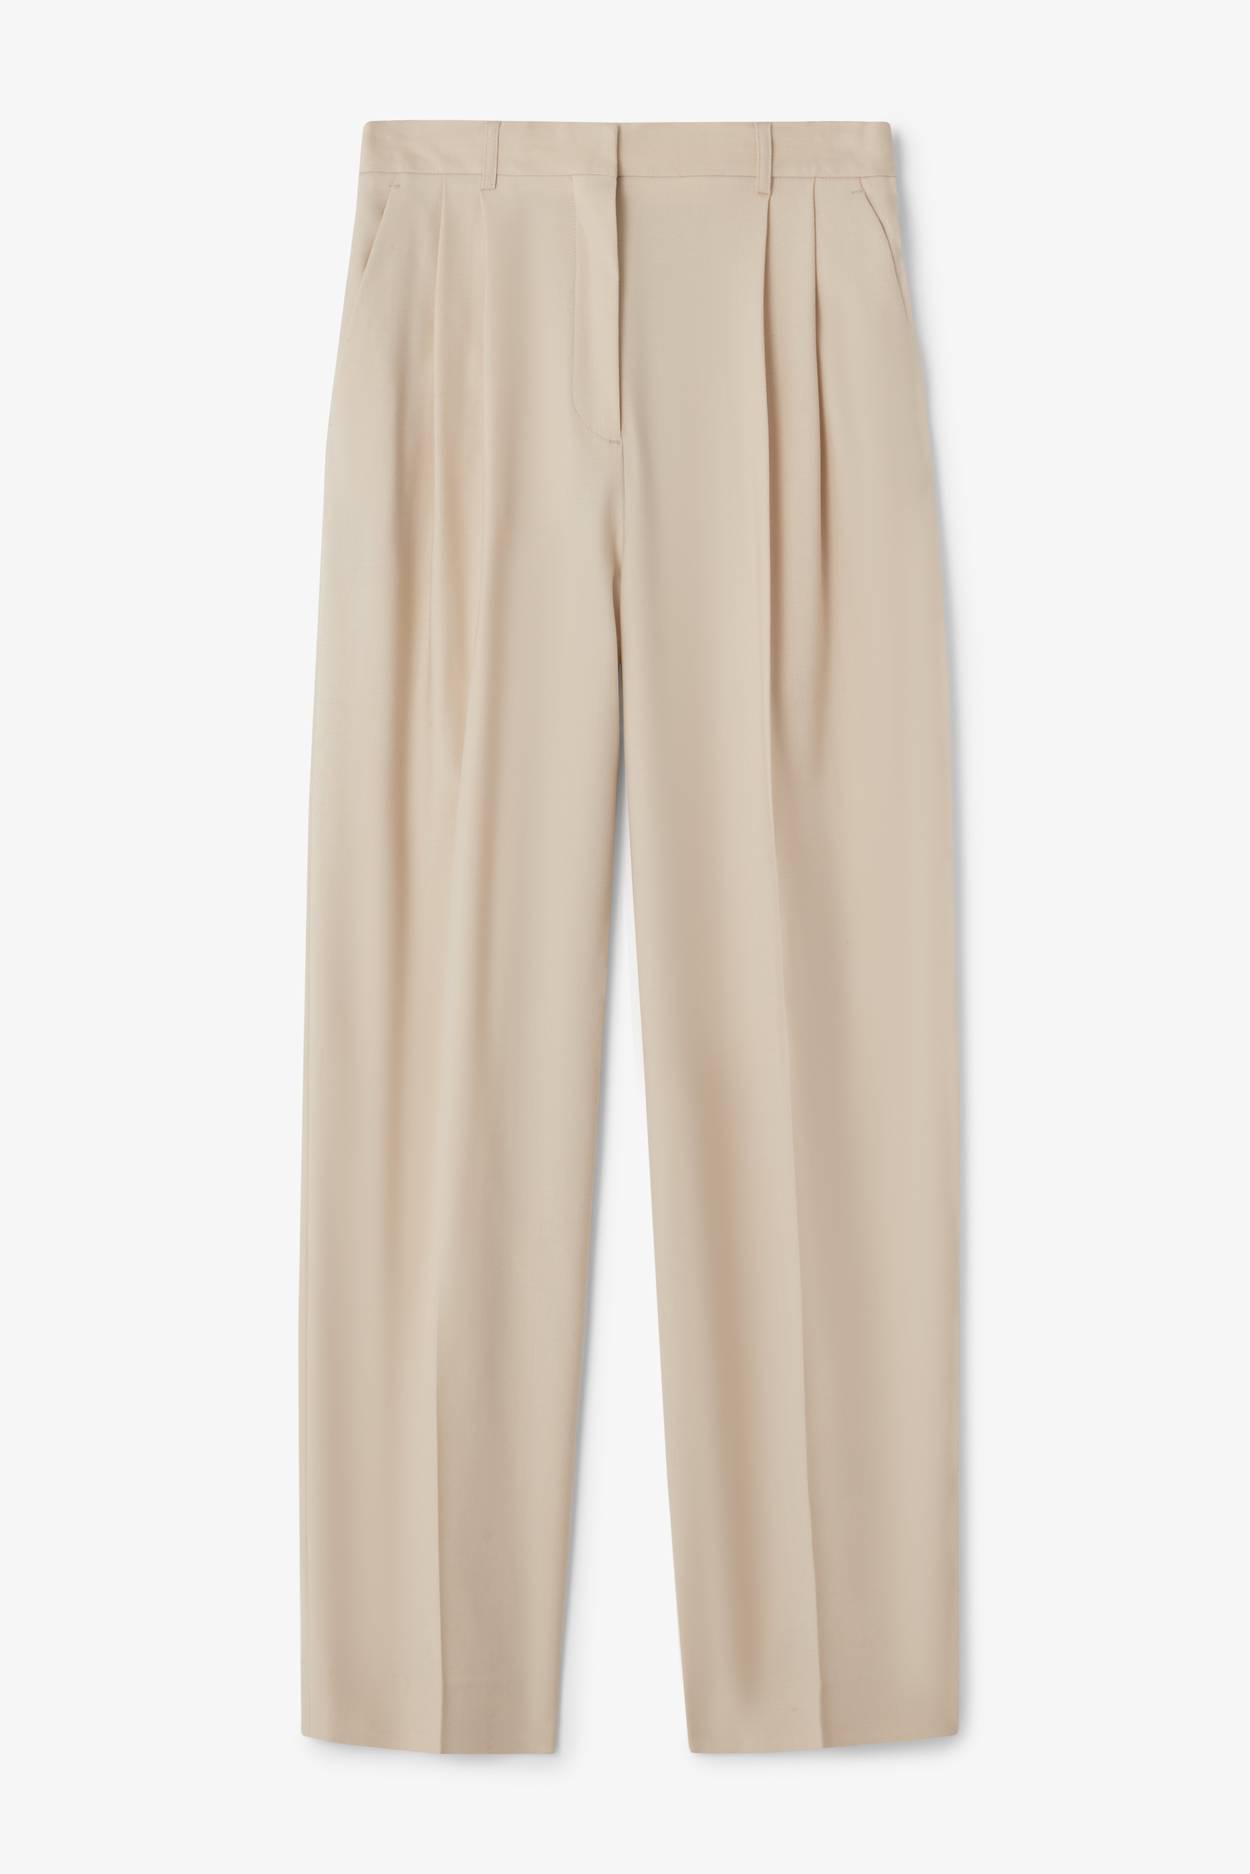 Beige Tailored Trousers